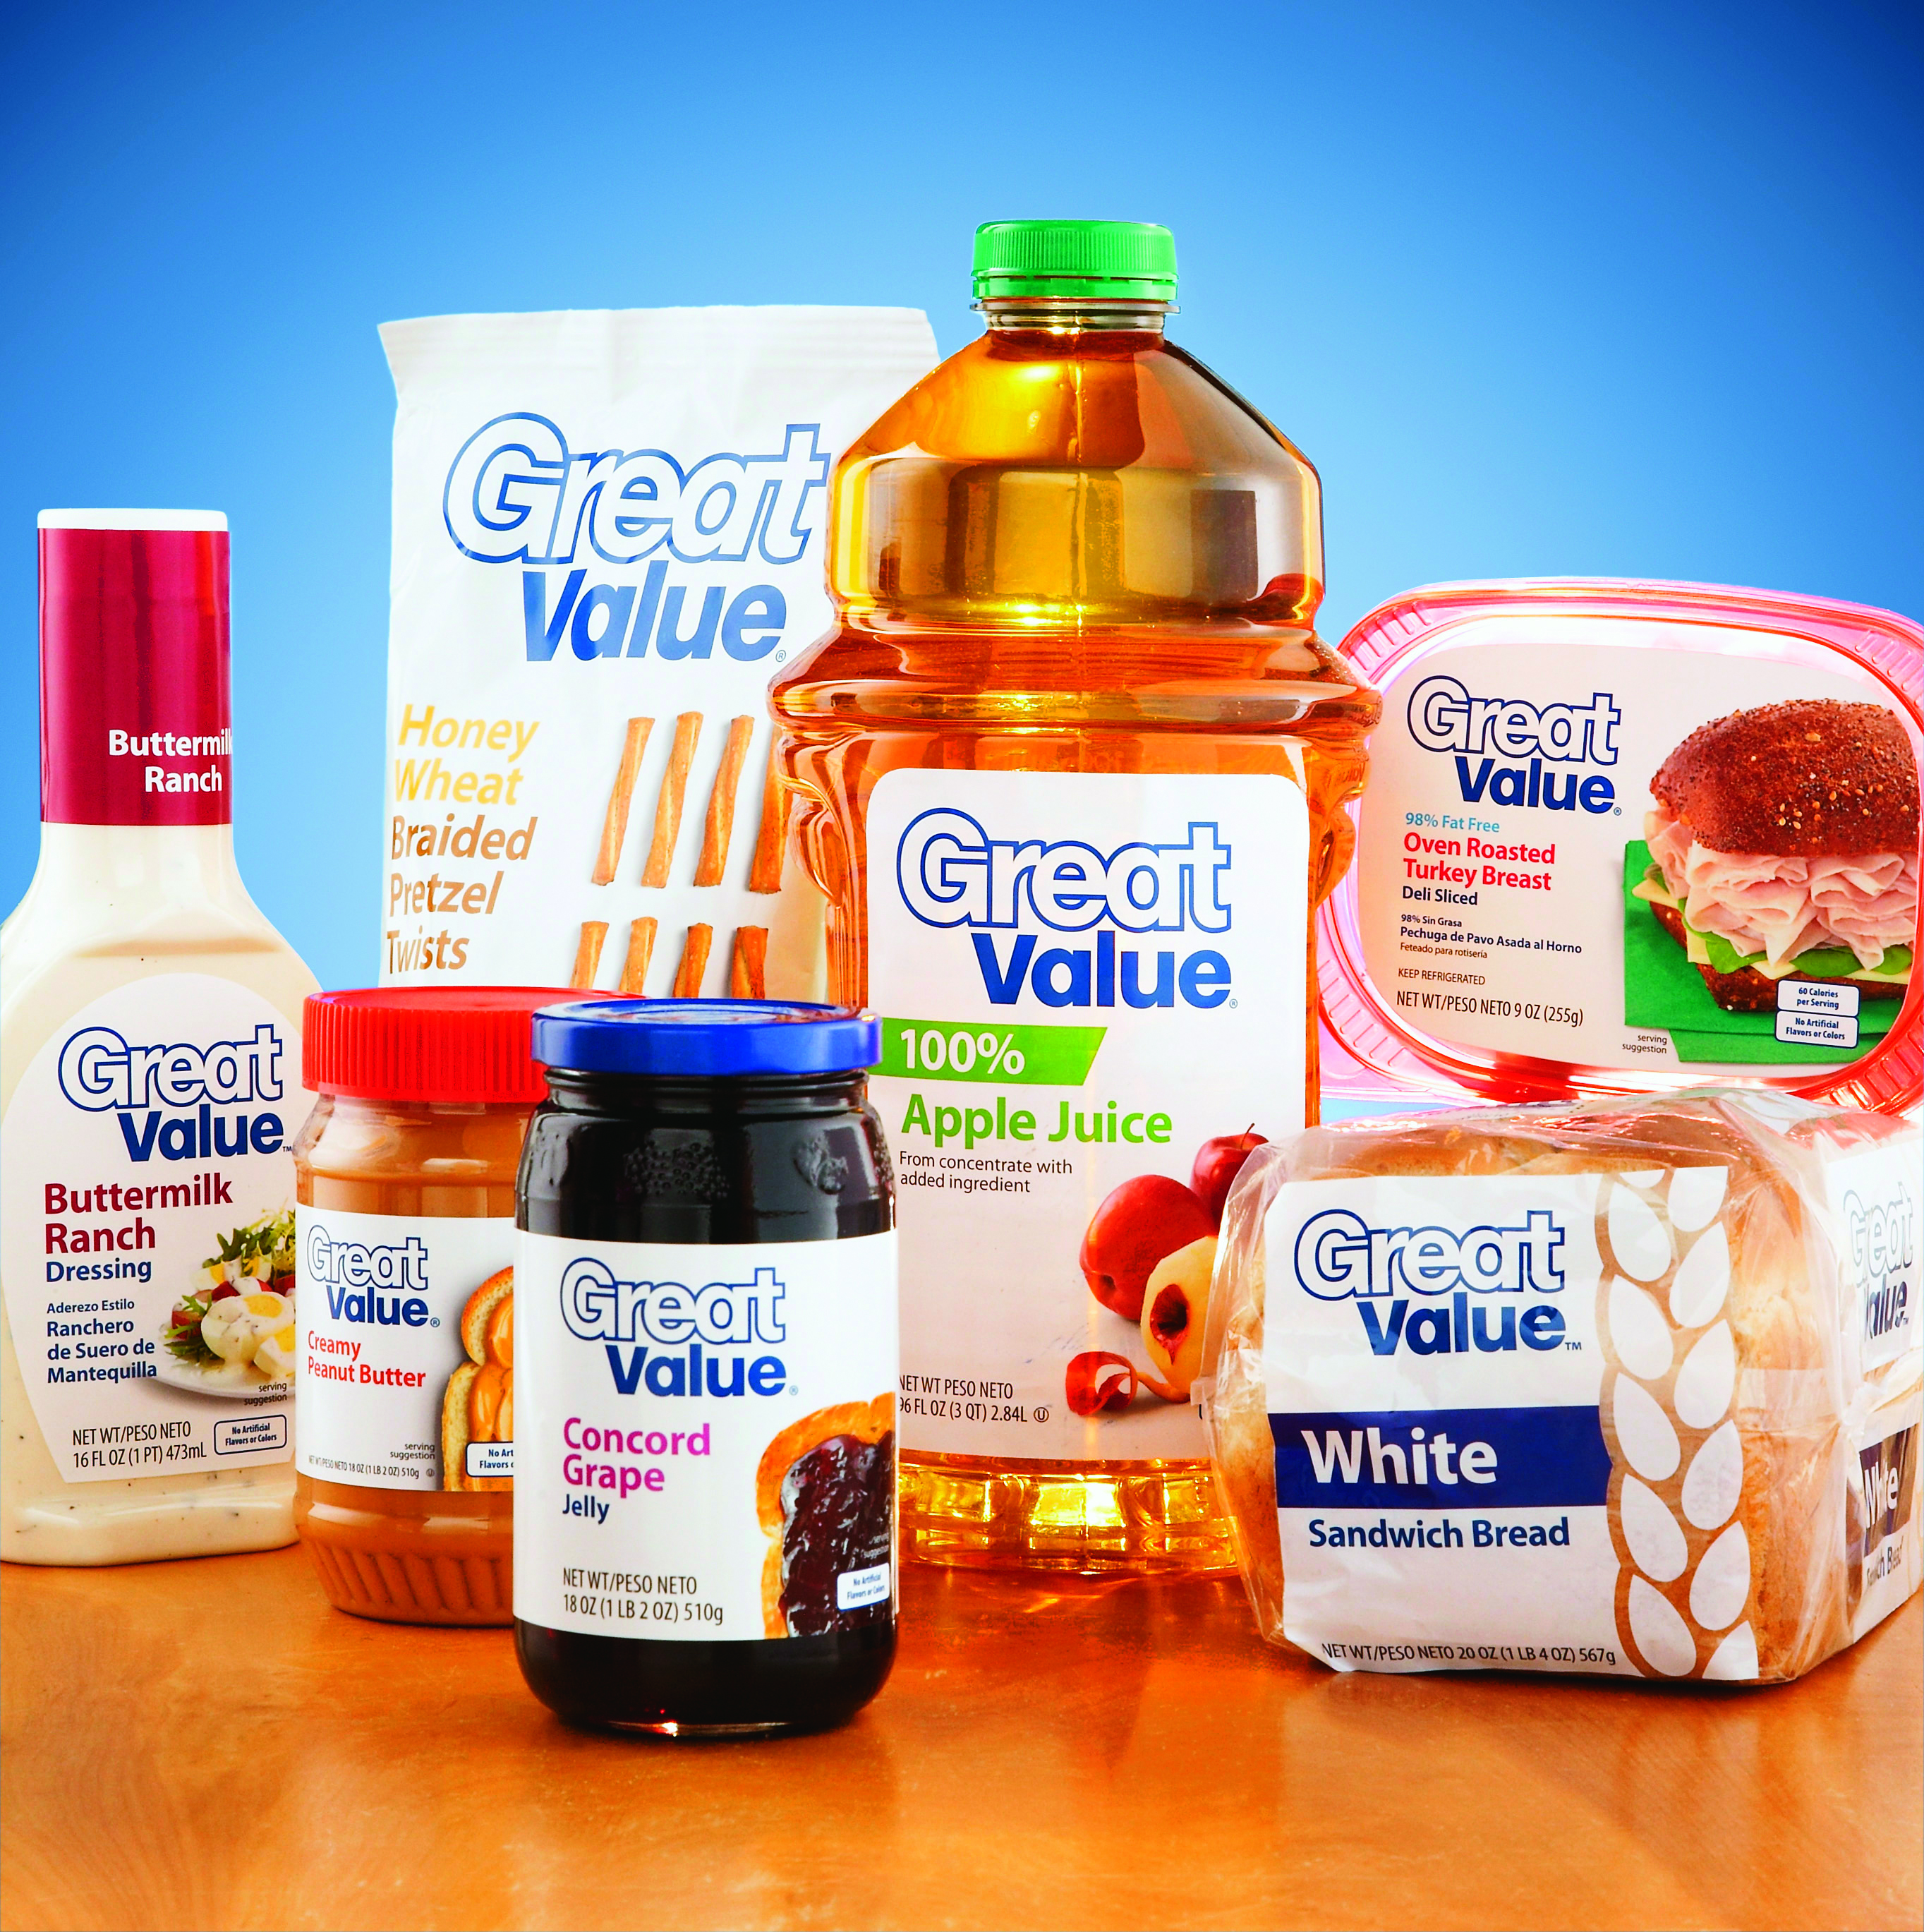 Products aspx product. Private Label упаковка. Great value Walmart. Product Label Design. Product labeling.